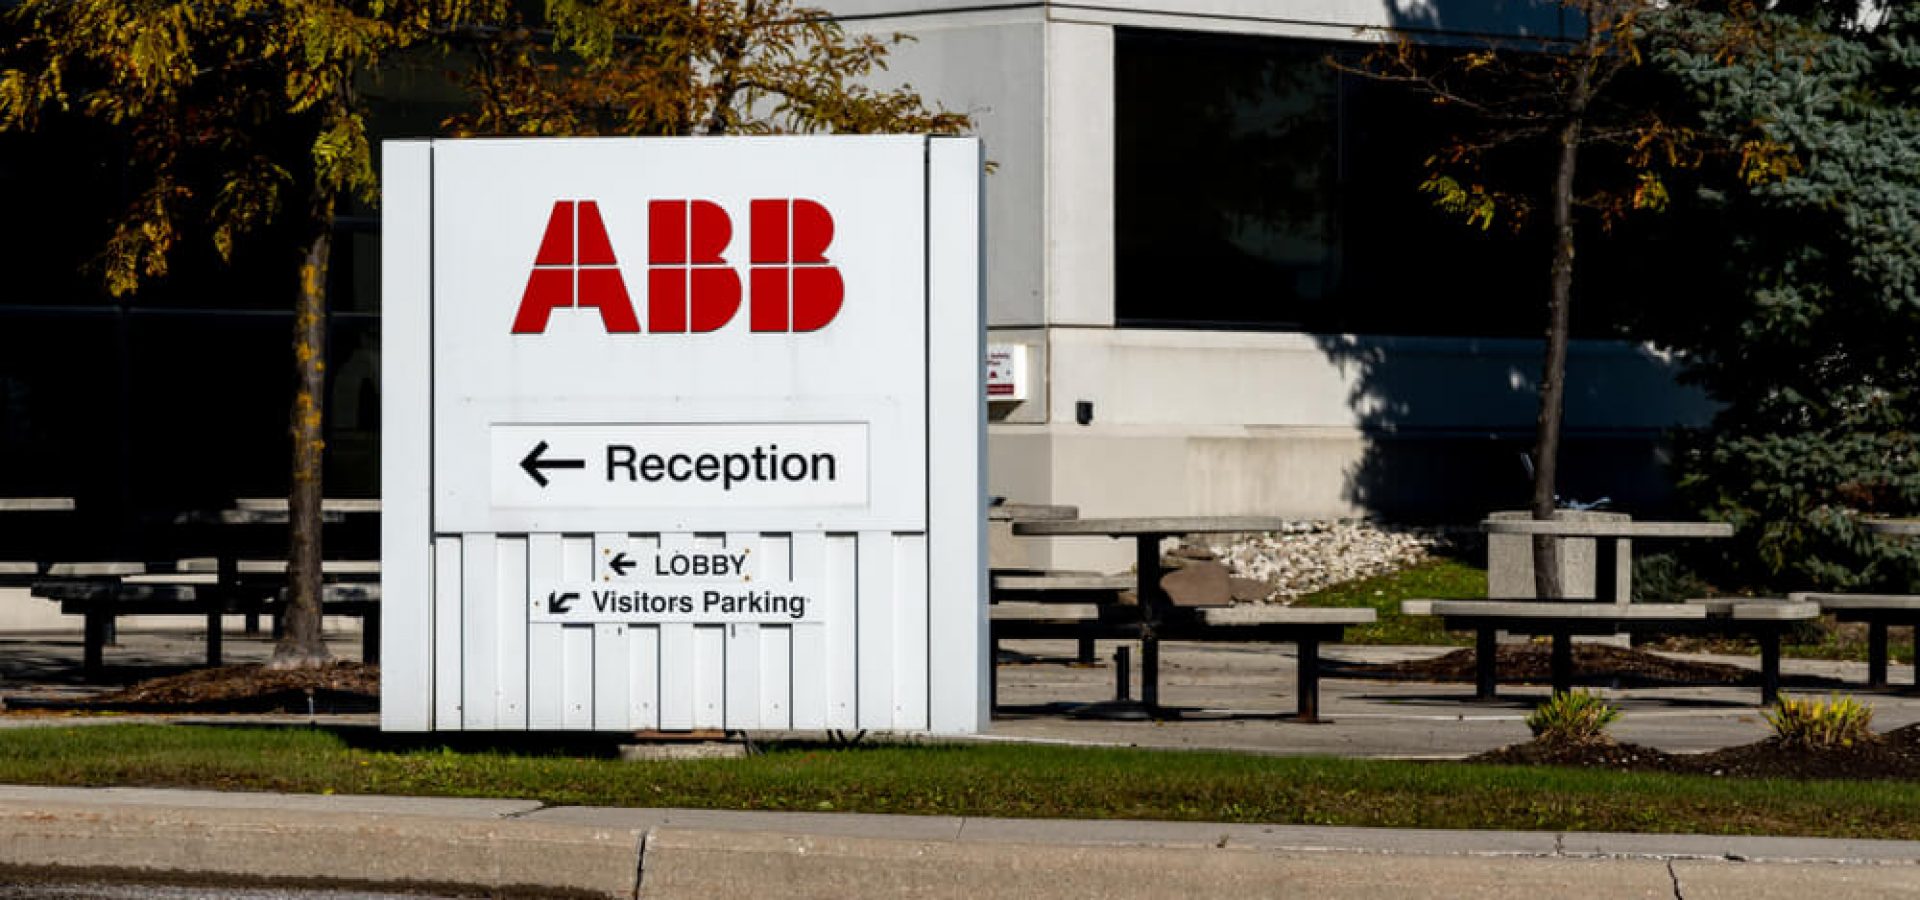 Wibest – Stock Report: Sign of ABB